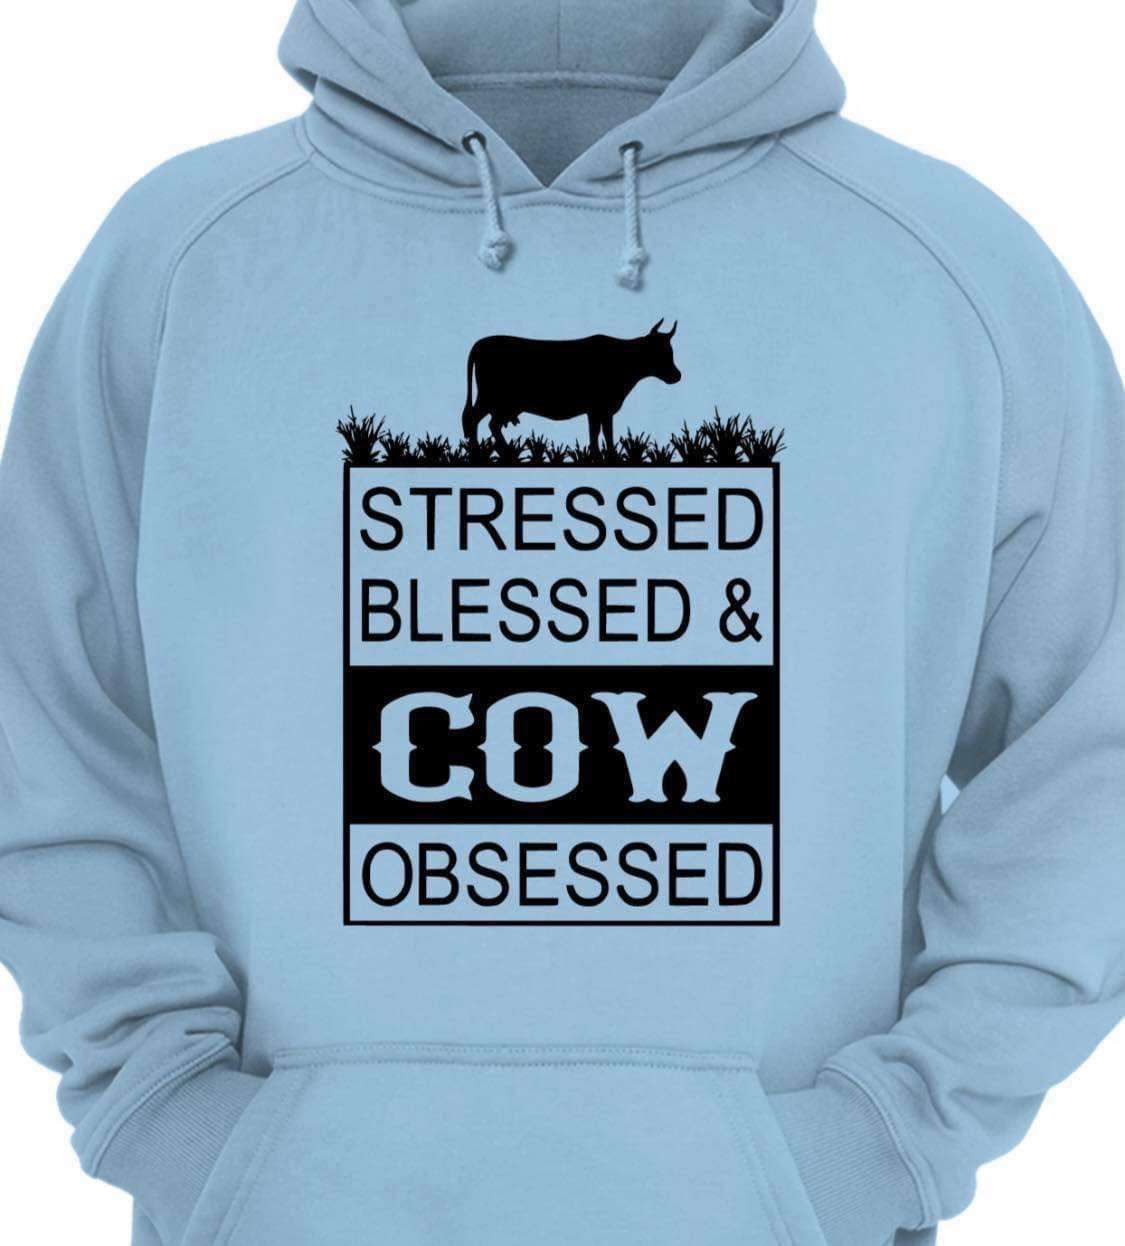 Stressed blessed and cow obsessed